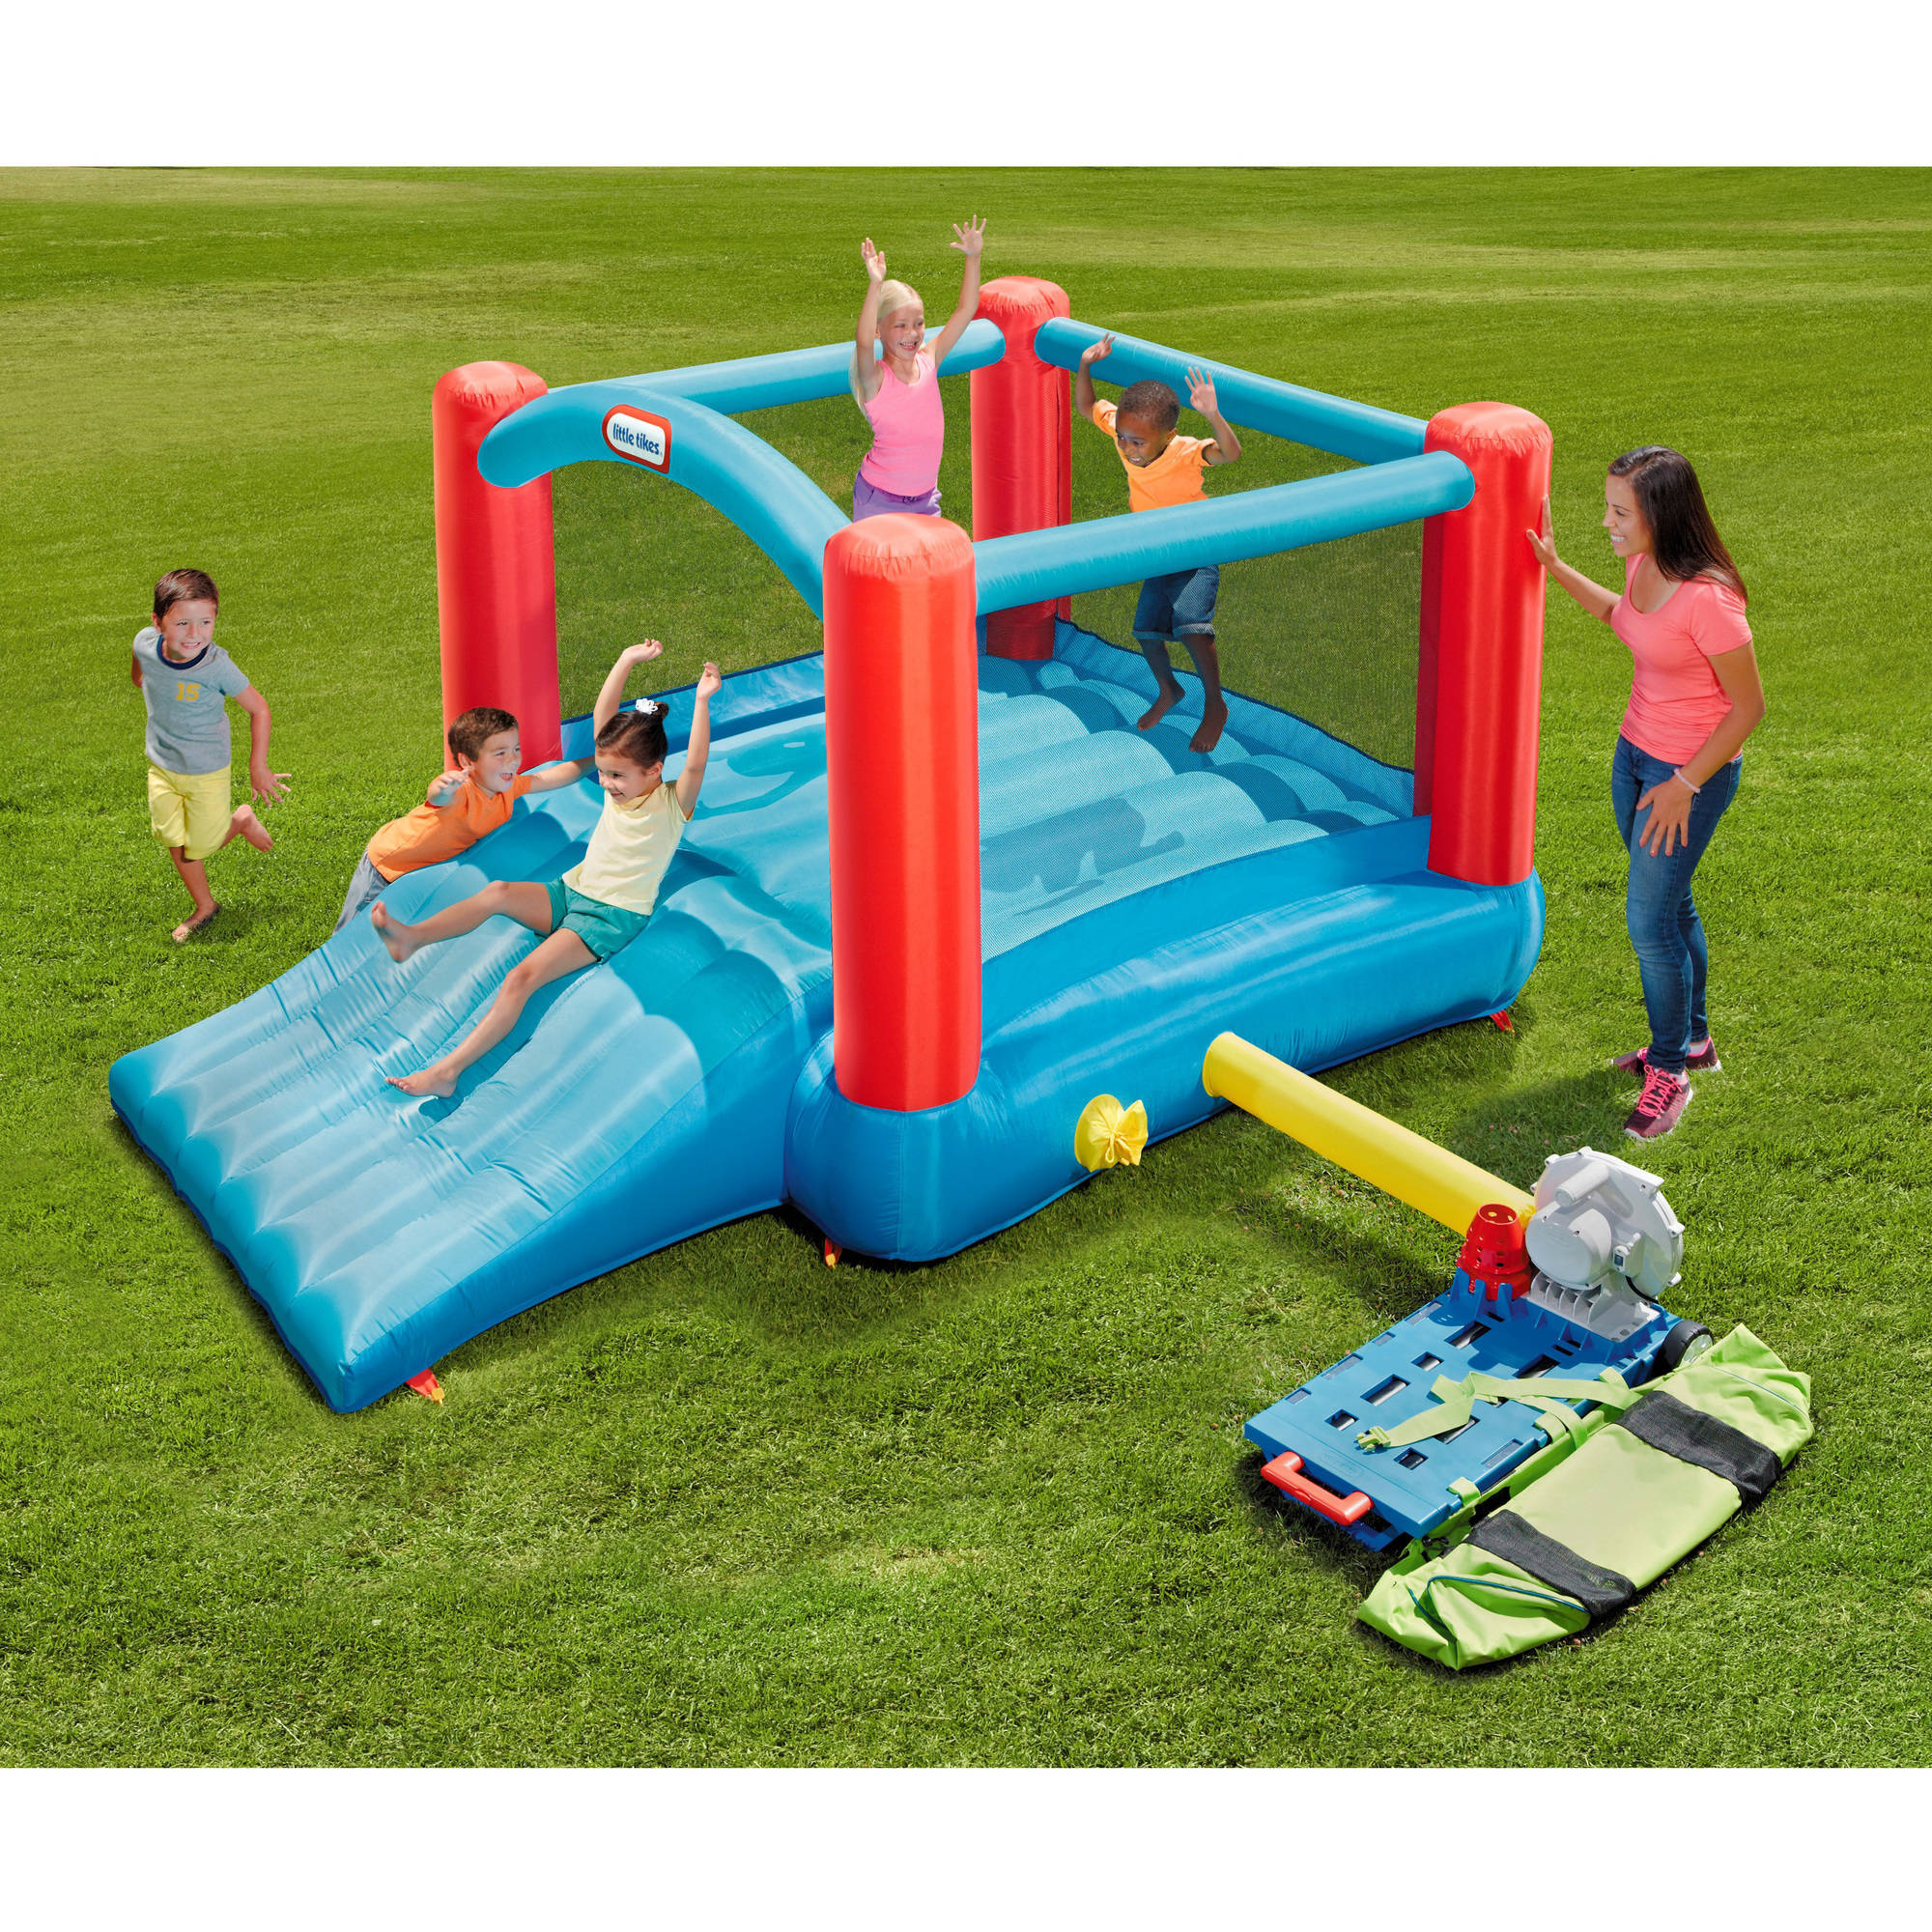 Little Tikes Pack 'n Roll 7'x7' Inflatable Bounce House with Slide, Blower and Wheeled Carry Case, Multicolor- Indoor Outdoor Toy Kids Girls Boys Ages 3 4 5+ - image 3 of 5